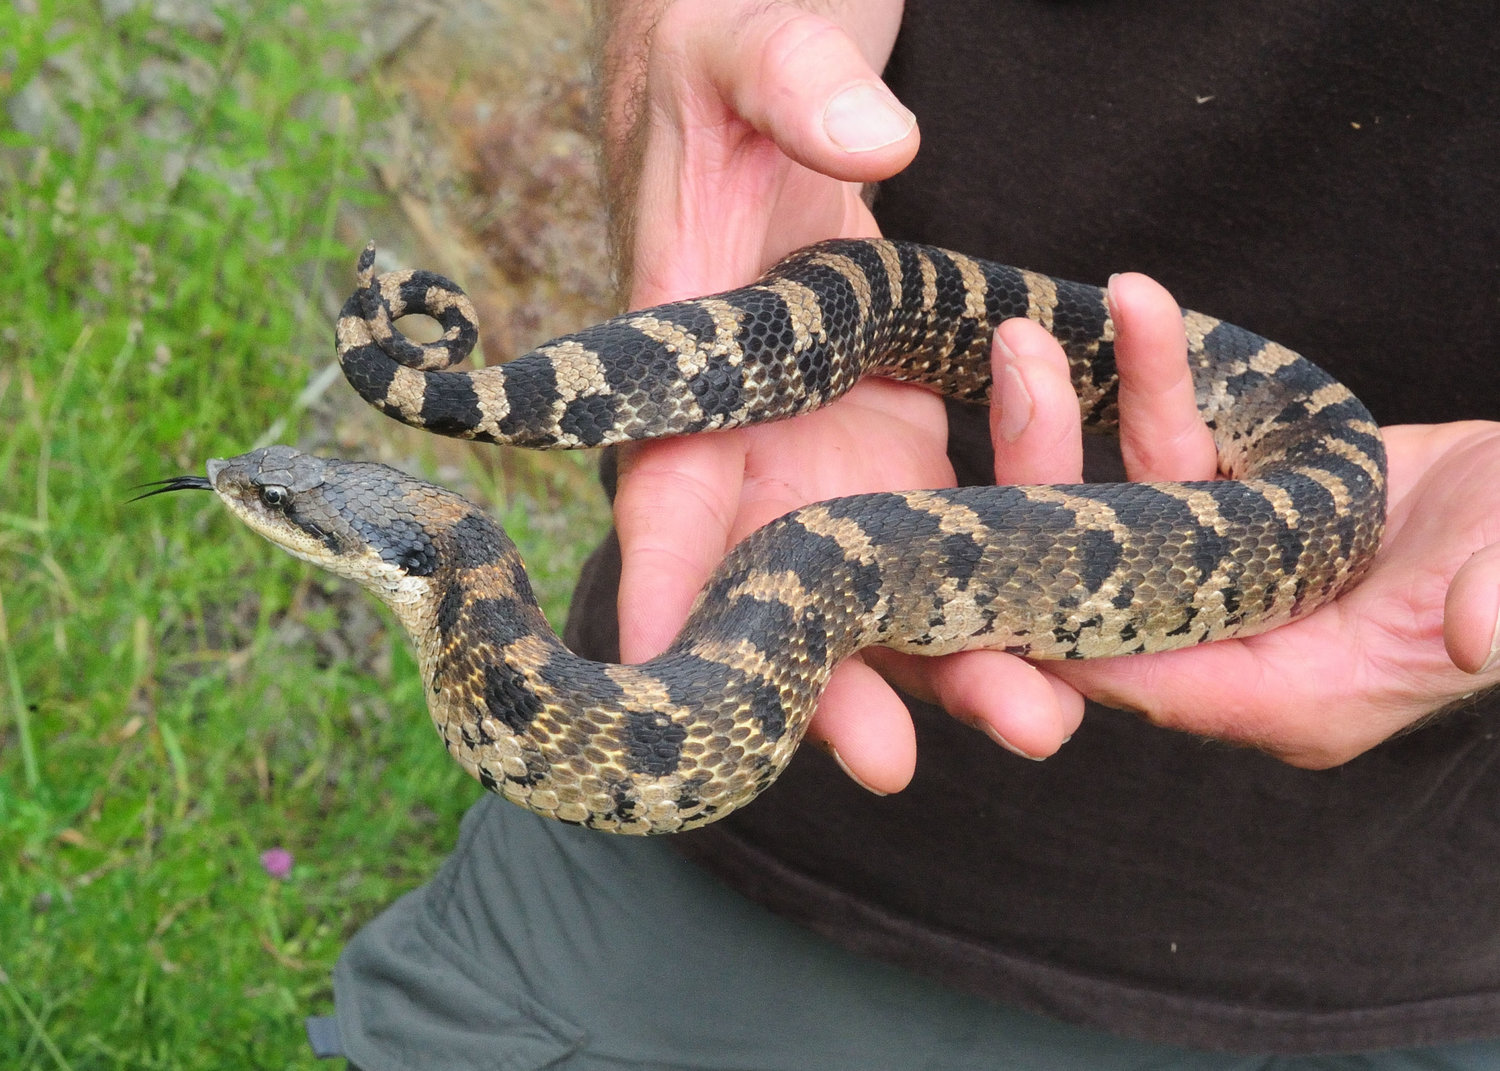 This is a smaller hog-nosed snake that has a lighter coloration; here, the marks are more easily seen. Rectangular back marks and smaller interlacing side marks can distinguish a hognose snake from other species. The upturned snout is used to dig into soil and leaf litter while finding toads and other prey.